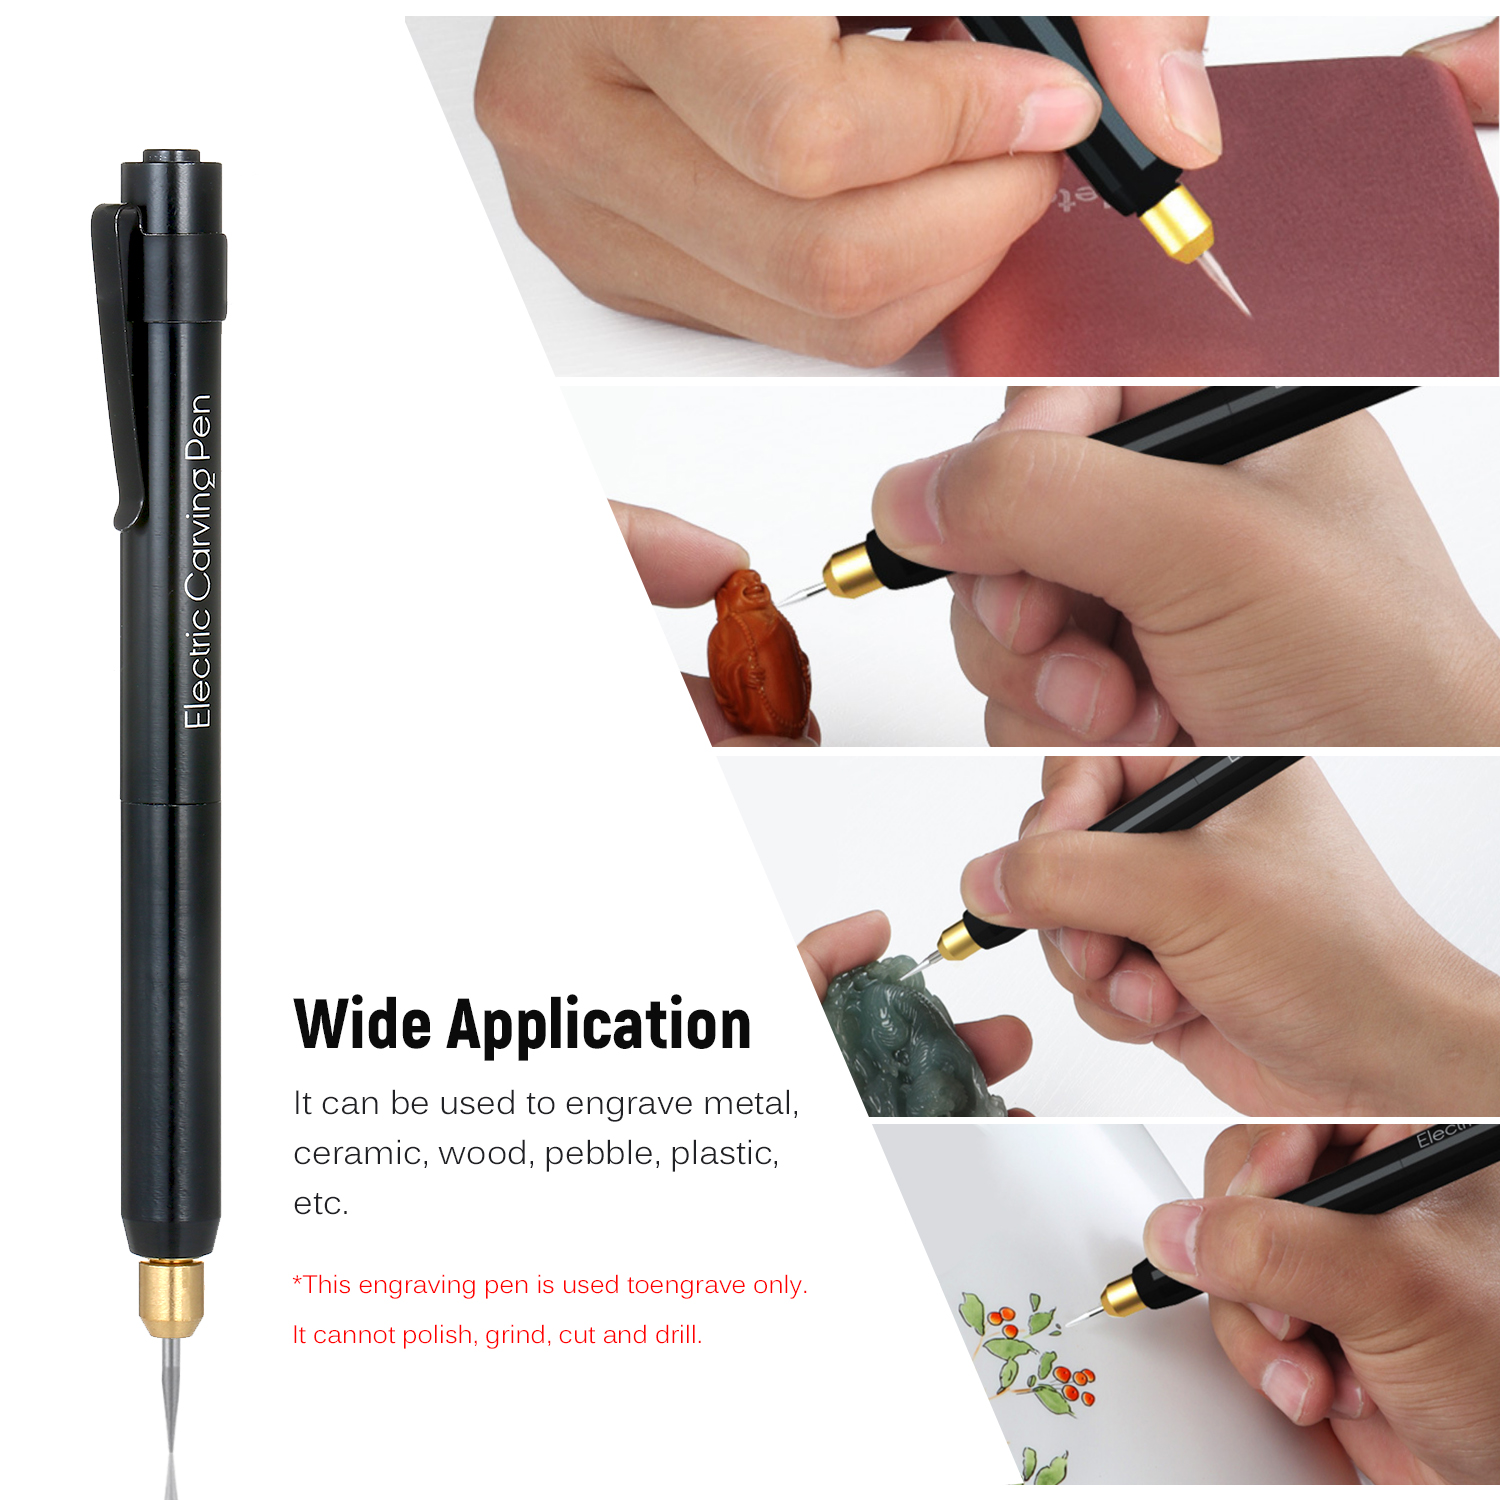 Portable Electric Engraving Pen Cordless Rechargeable Engraver Engraving Machine Carving Tool for Wood Ceramic Metal Stone